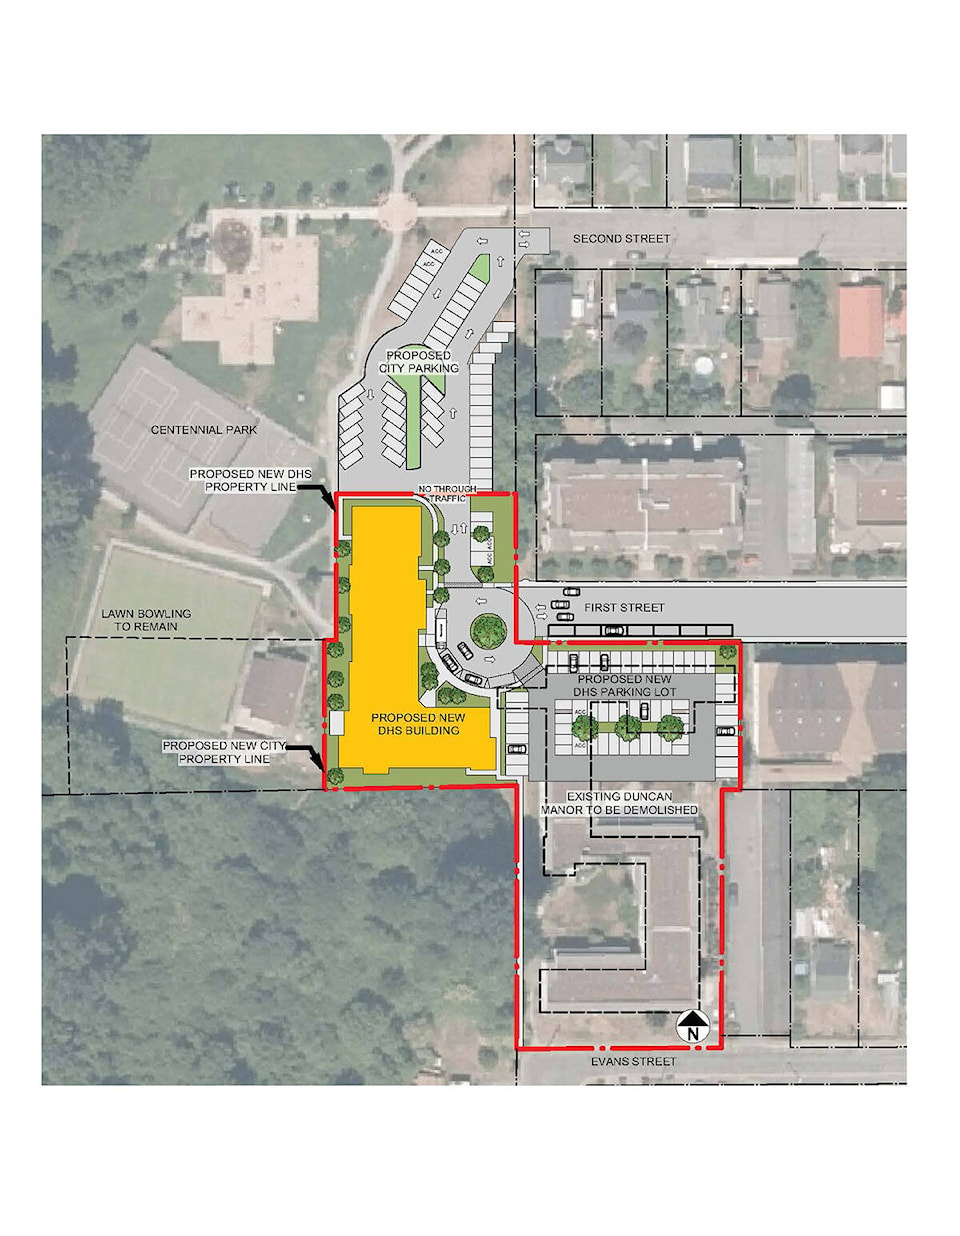 26481722_web1_210916-CCI-Duncan-Manor-submit-rezoning-application-picture_1